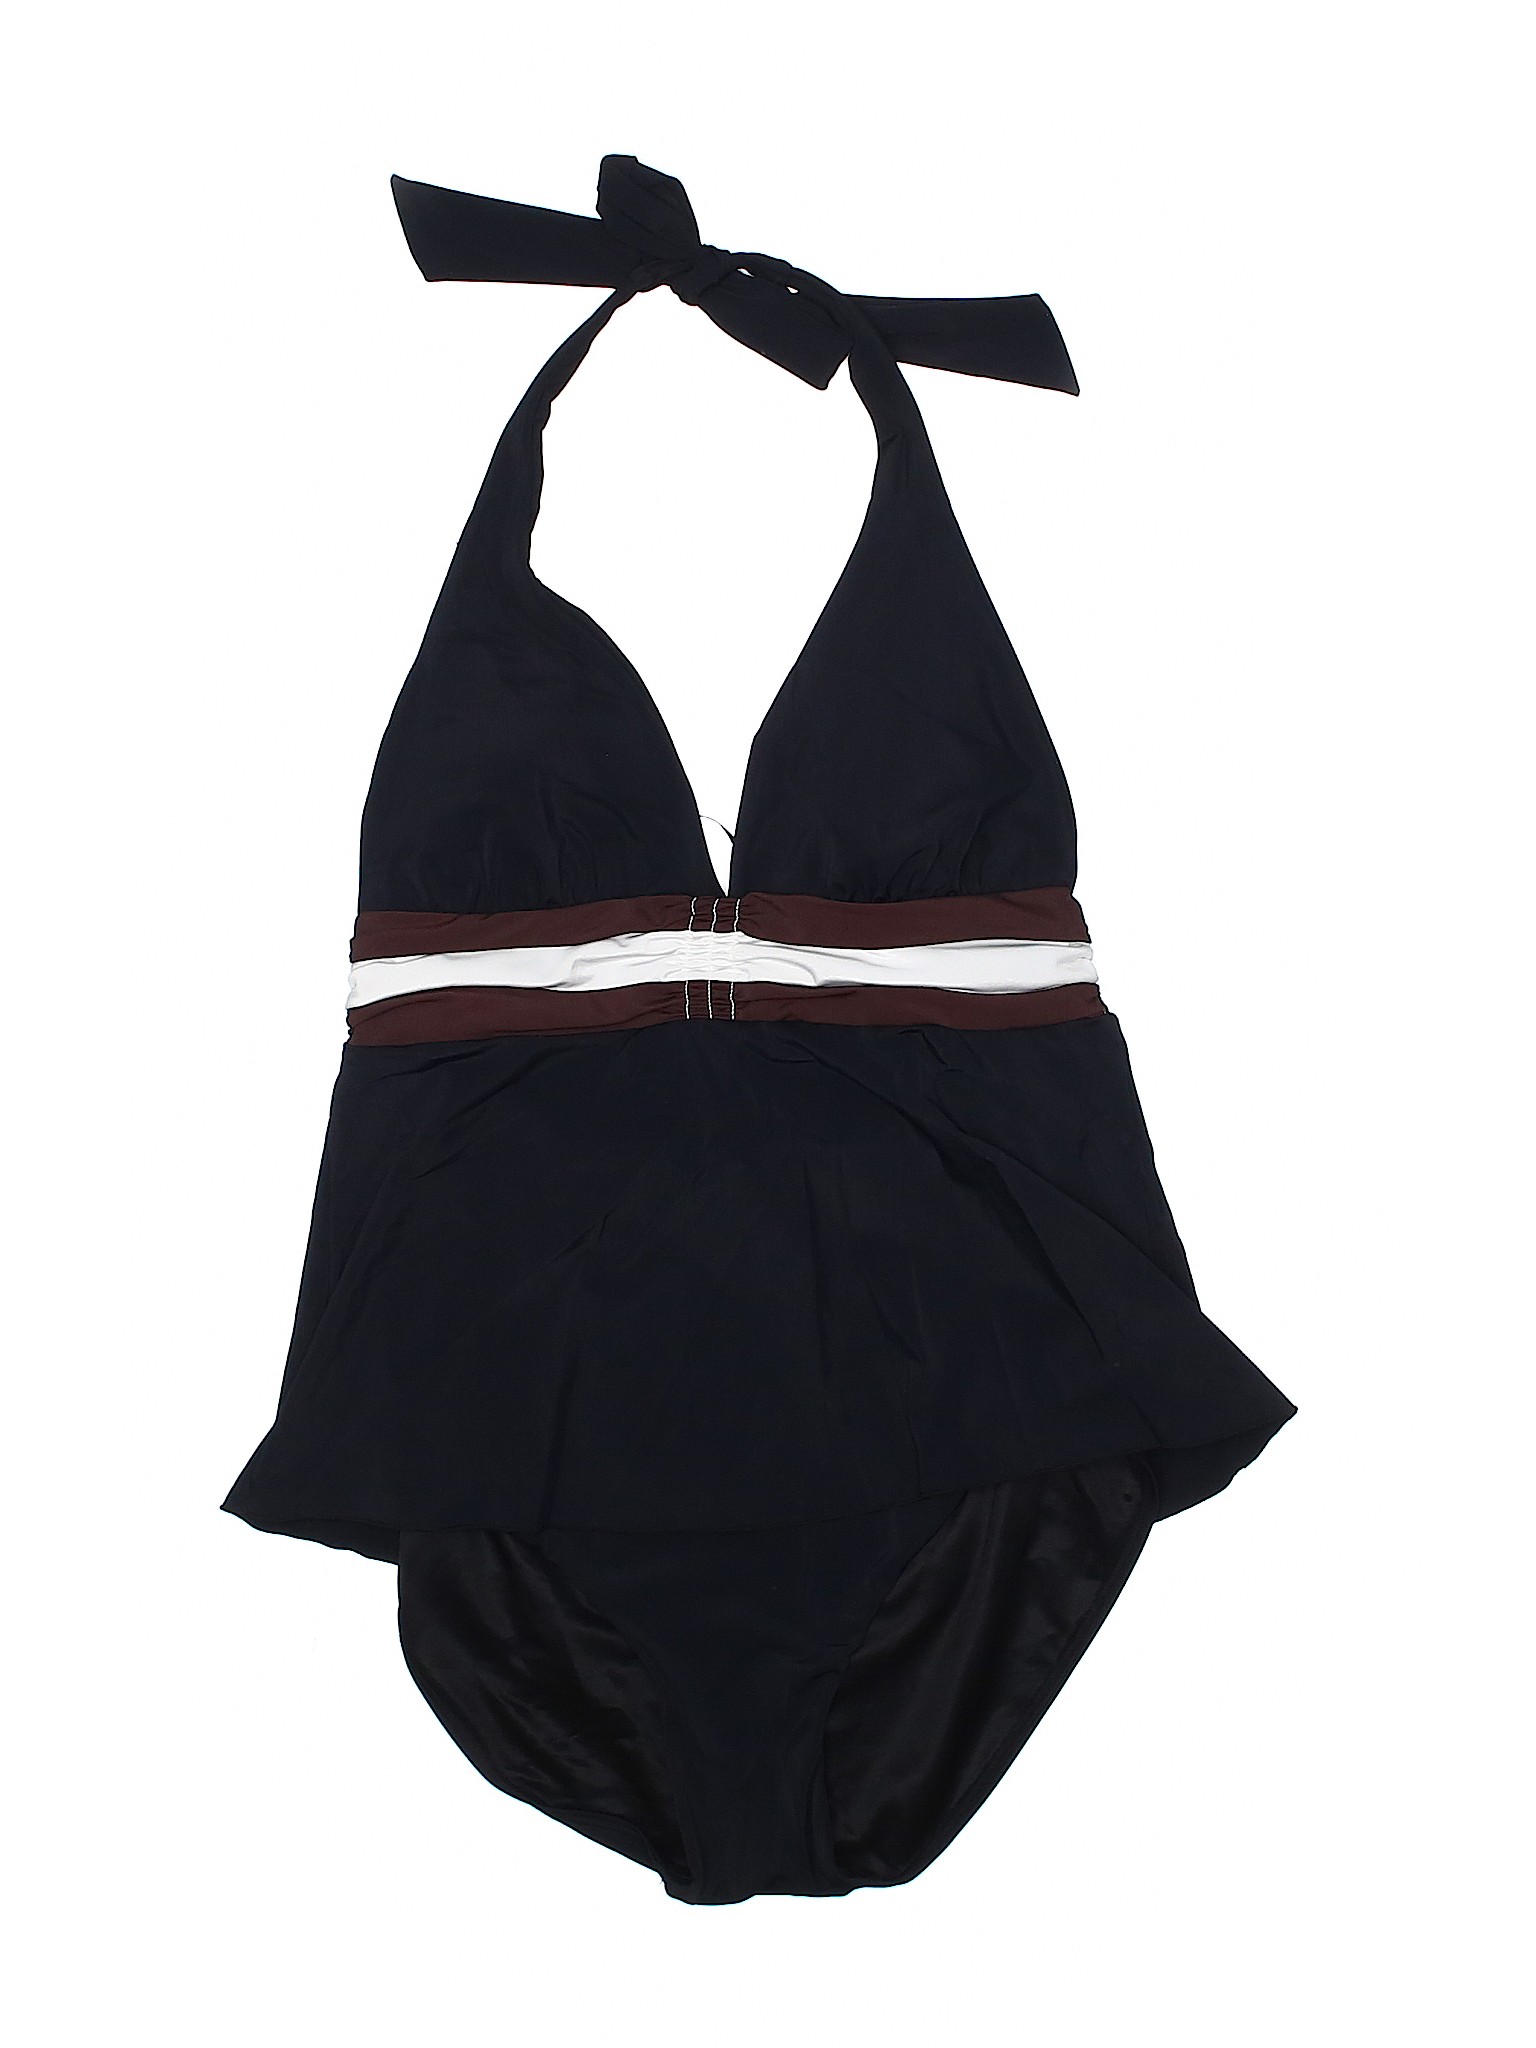 Swimsuits For All Black Halter Top Swim Dress - swimsuits